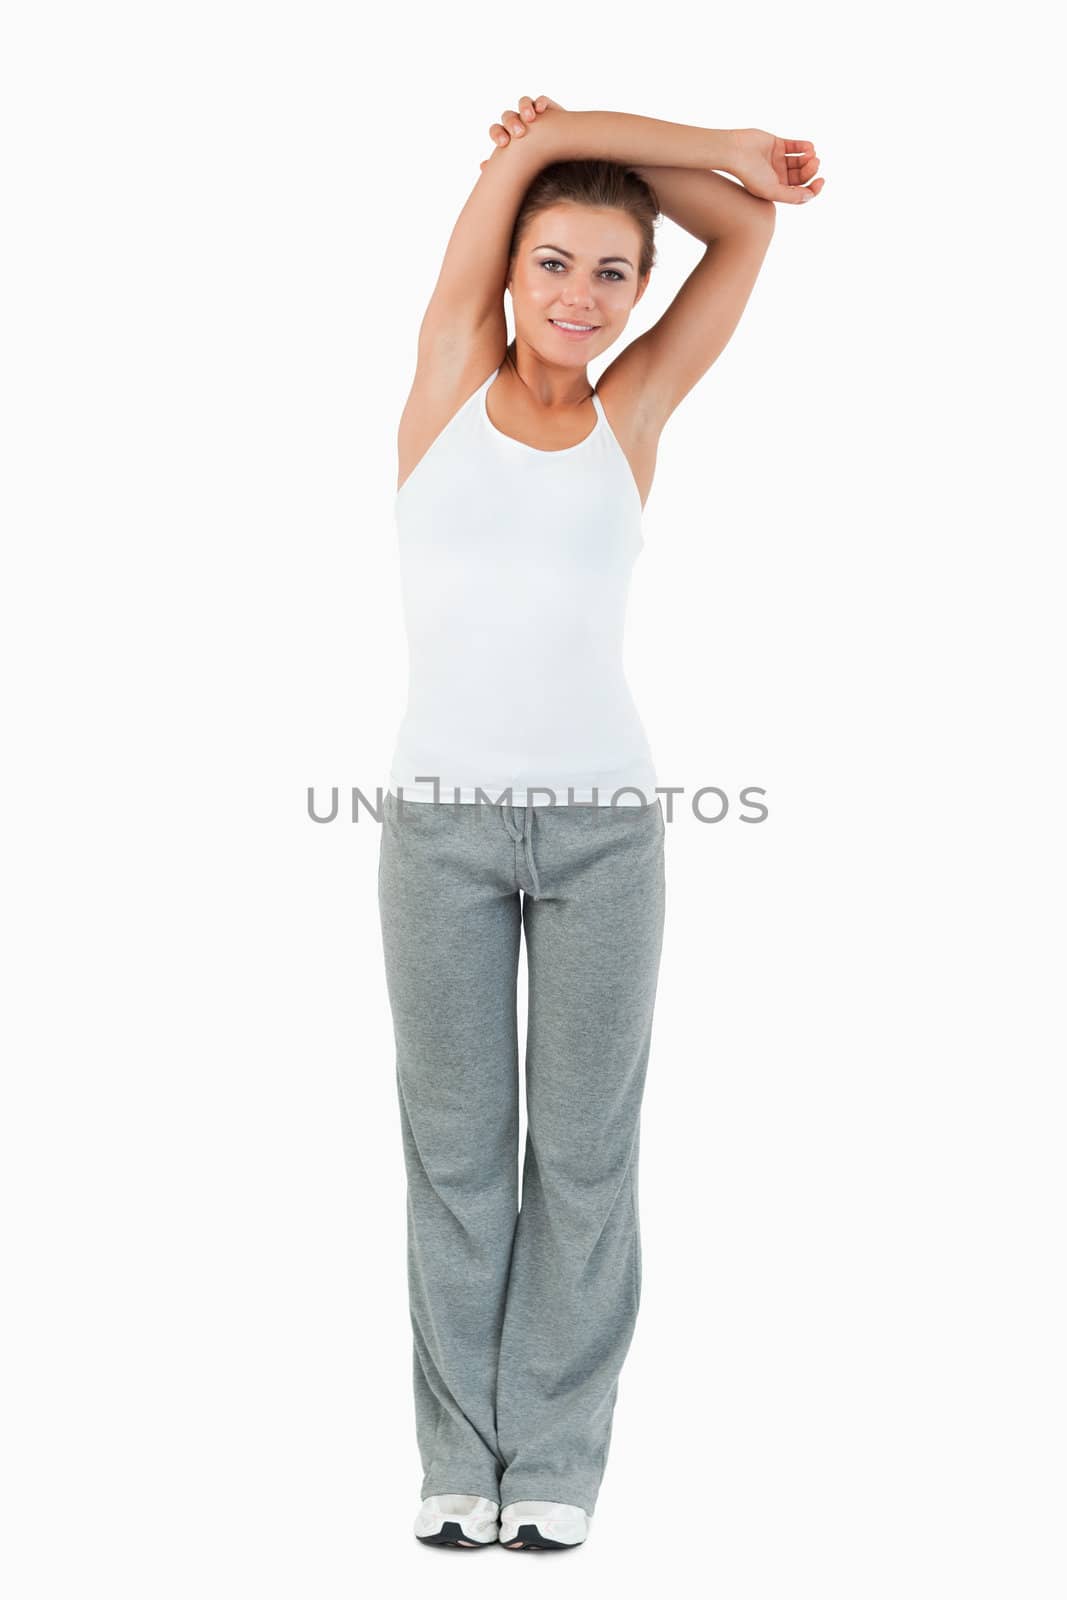 Portrait of a woman stretching her arms against a white background